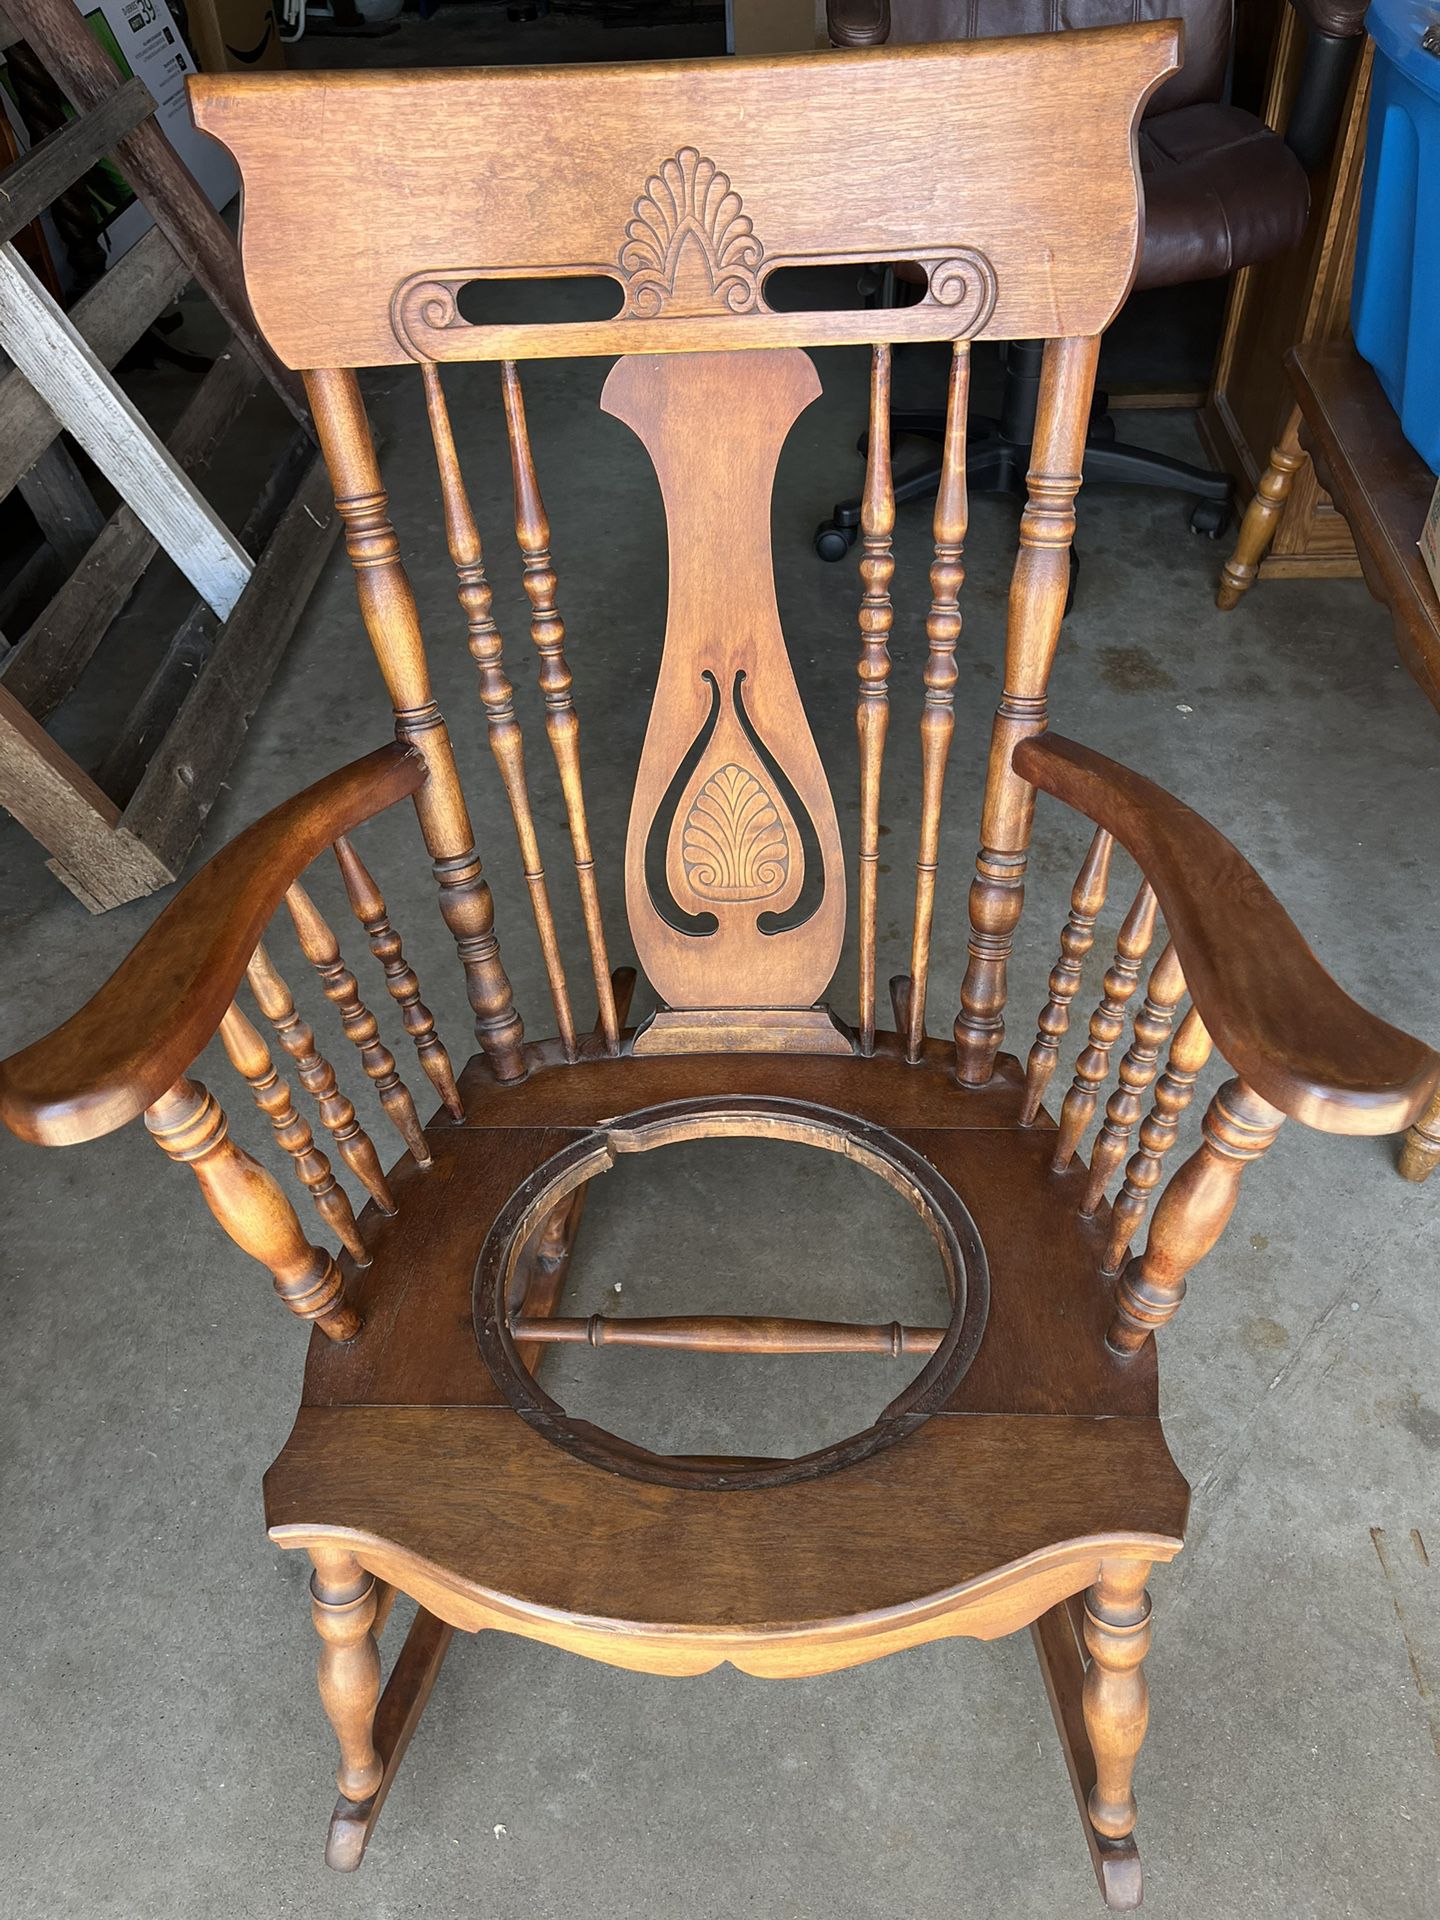 Vintage Oak Rocking Chair. In very good preowned condition.  For its age, the chairs finish is good. It is missing the seat which may have been wicker